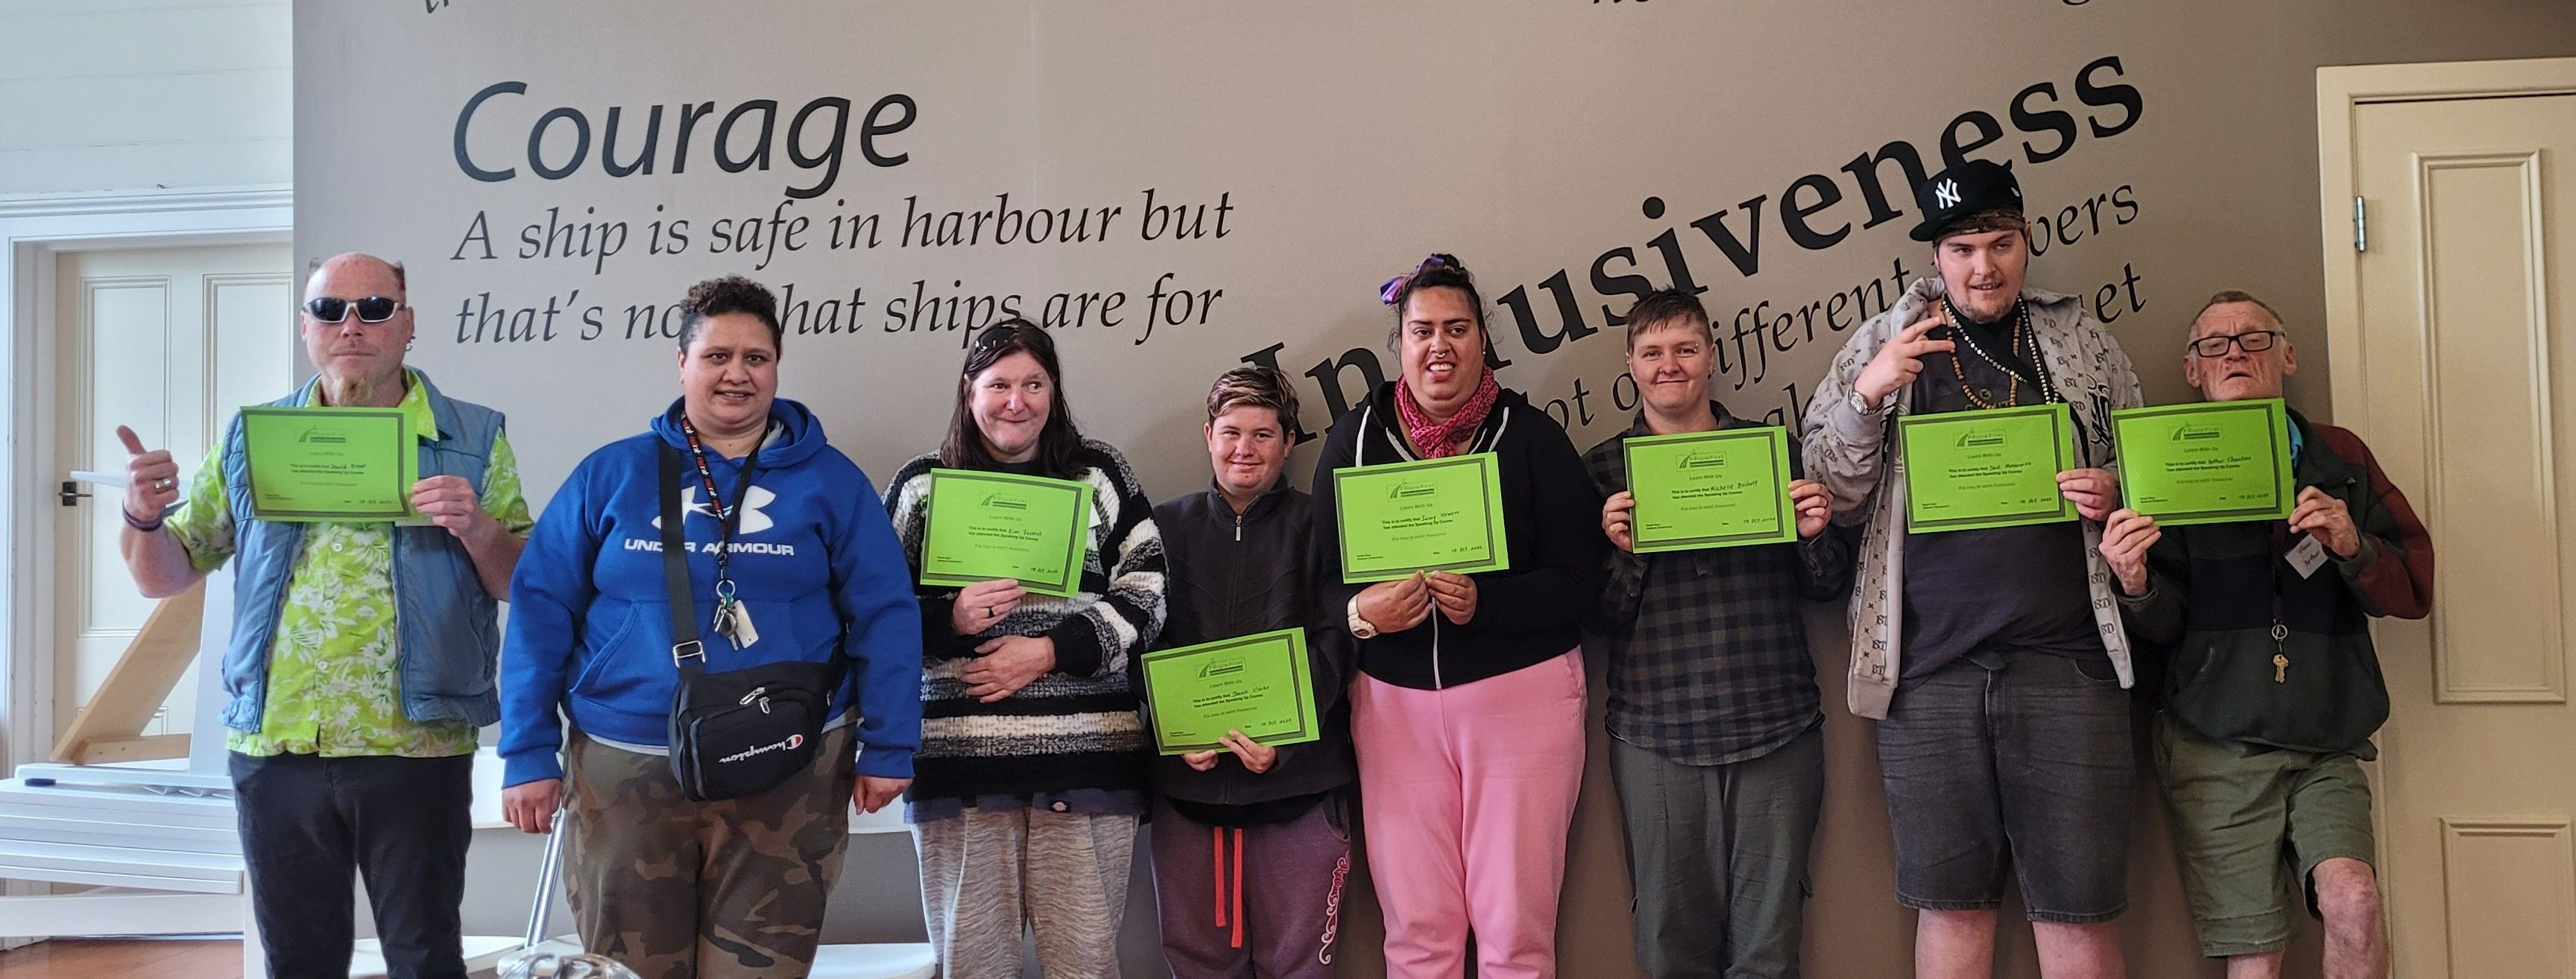 Line up of 8 people holding up green certificates in a room with a back drop that says Courage a ship is safe in harbour but that's not what ships are for.